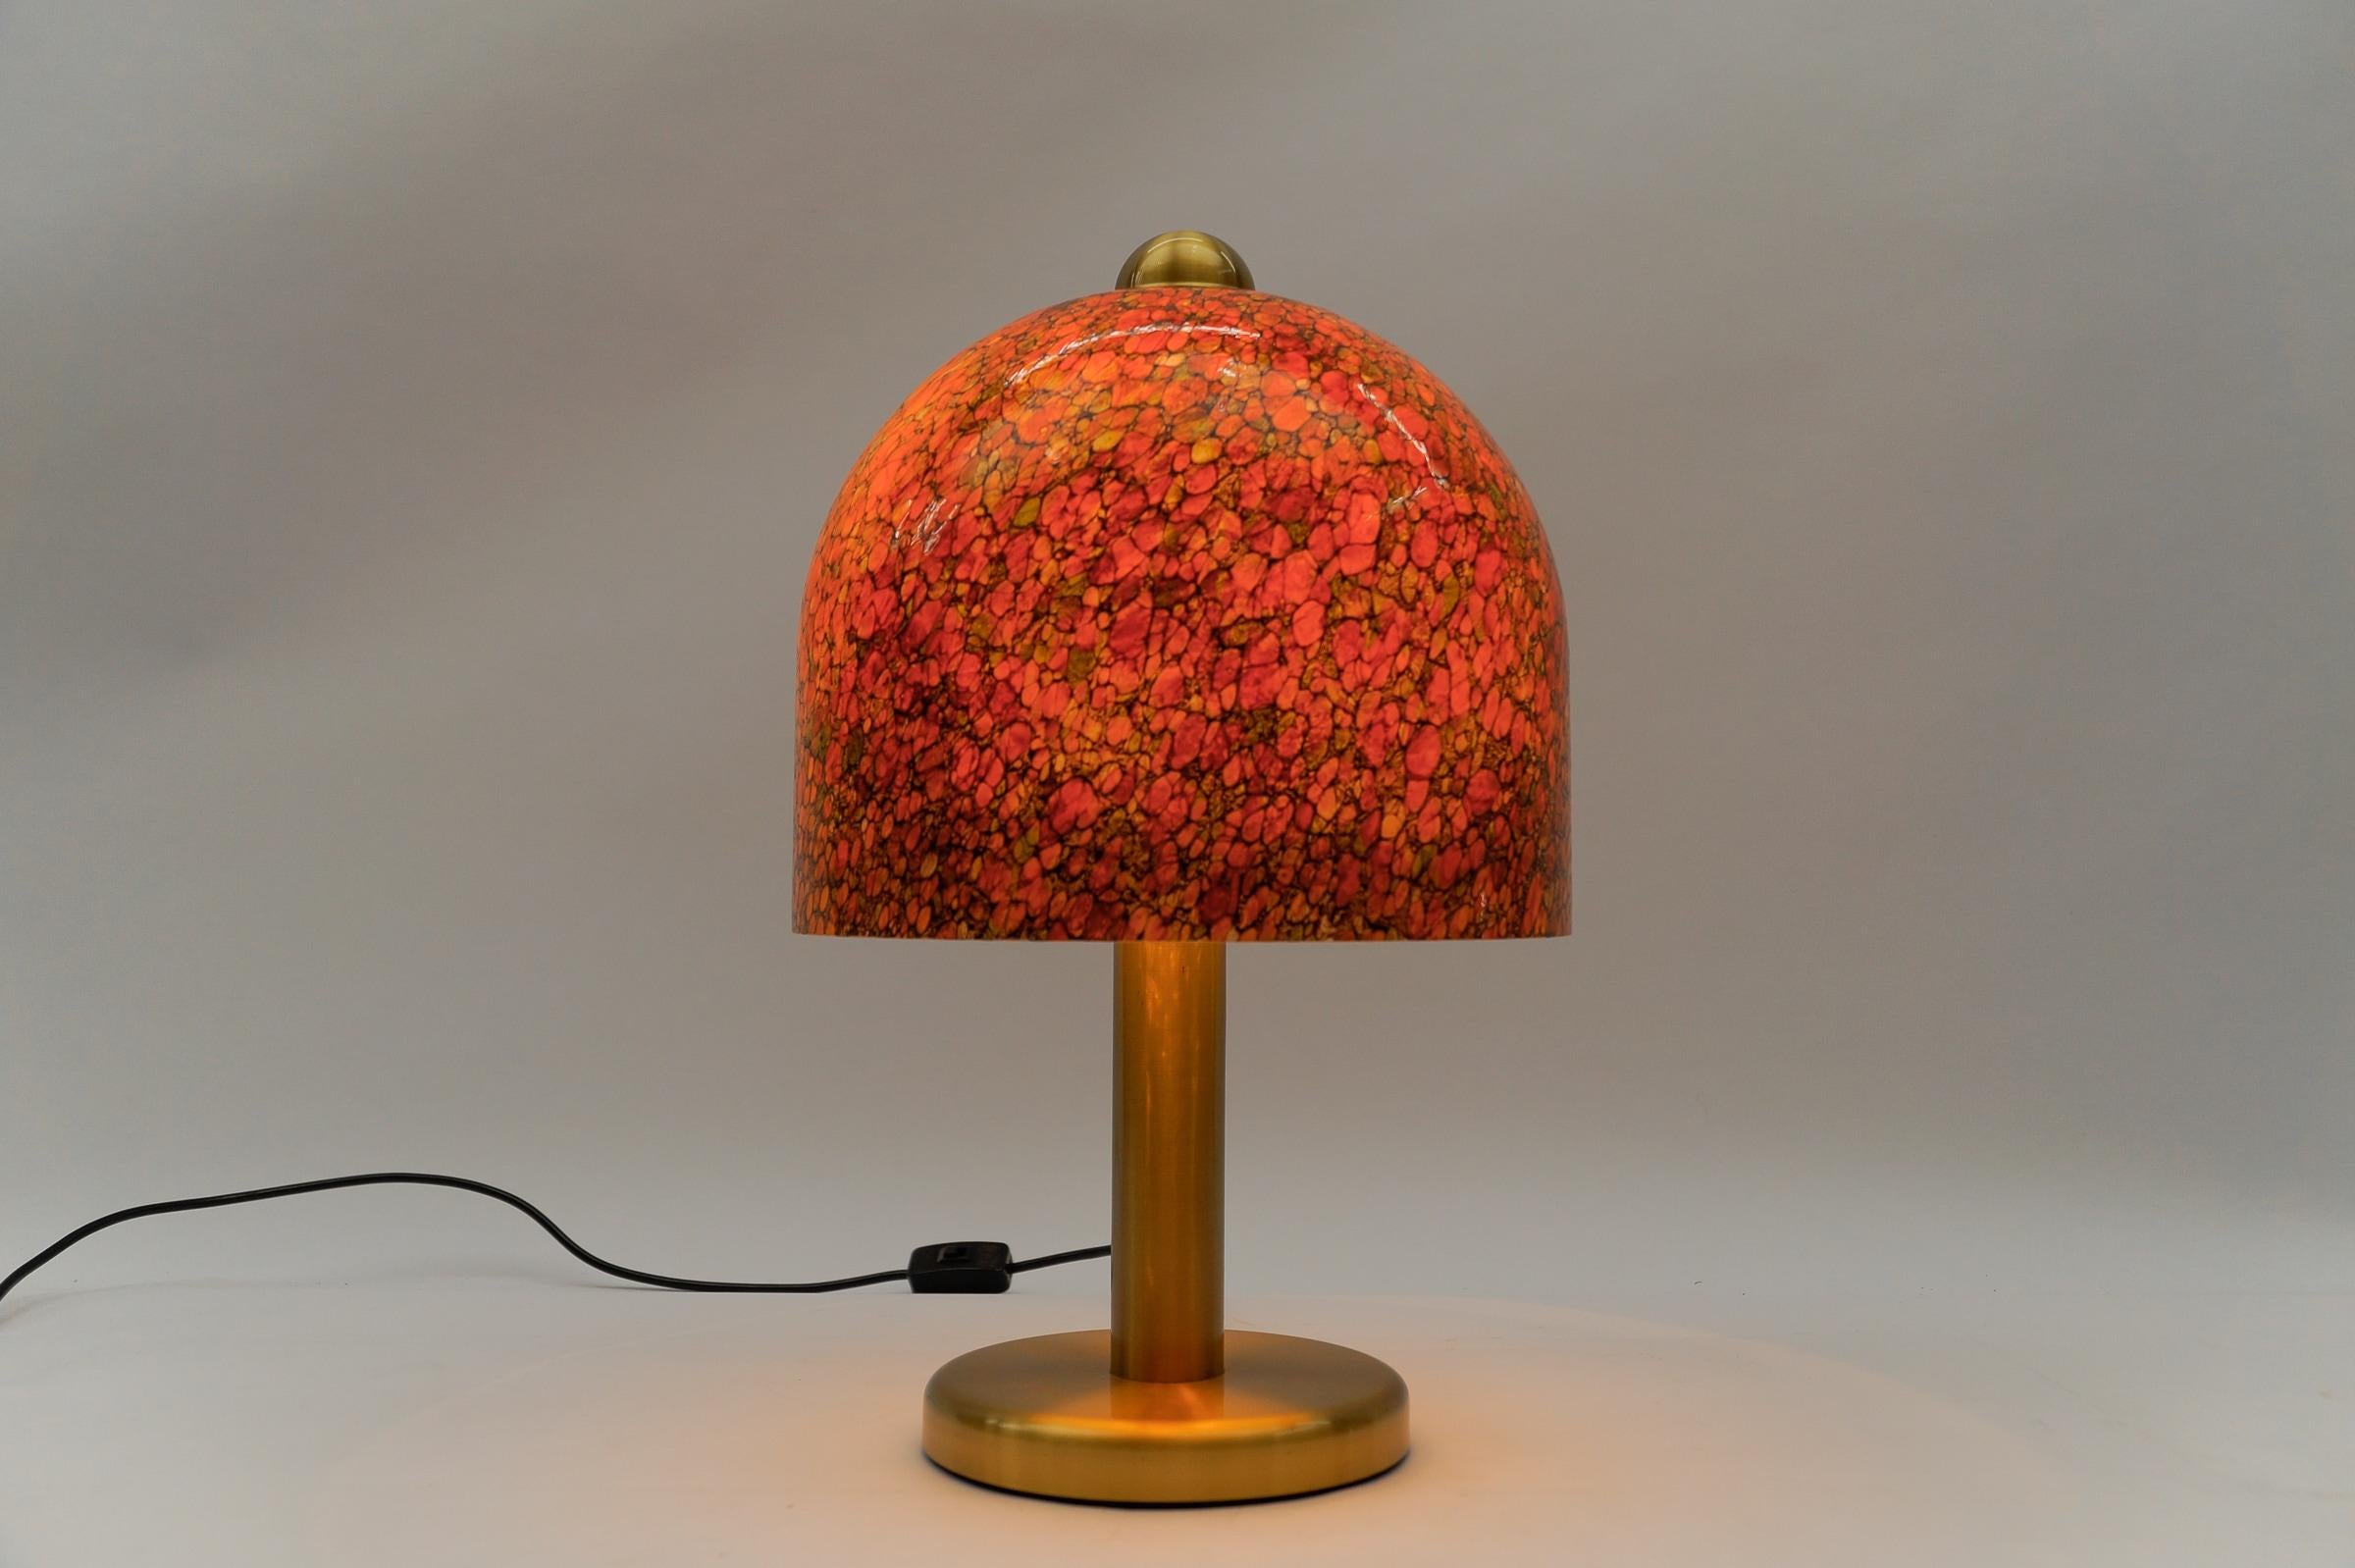 Lovely Multicolored Glass Table Lamp by Peill & Putzler, 1960s


The lamp needs 1 x E27 / E26 Edison screw fit bulb, is wired, and in working condition. It runs both on 110 / 230 volt.

Very elegant and cute at the same time.

Light bulbs are not